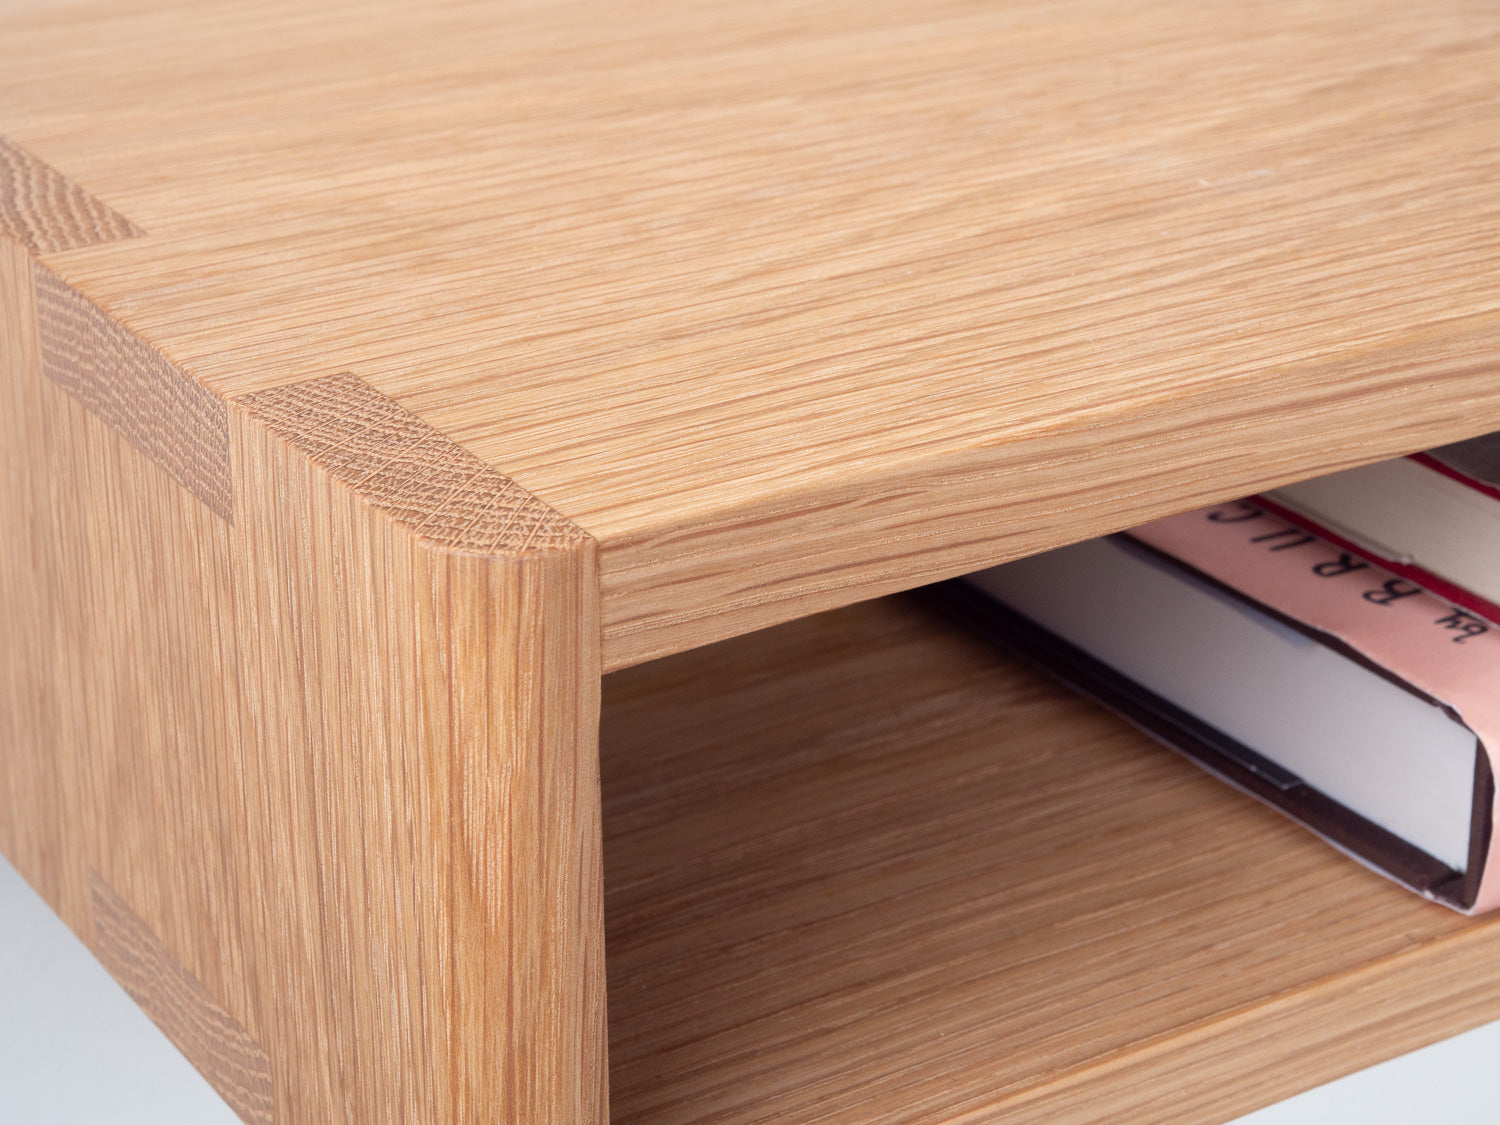 Mesa Bedside Shelf in White Oak pictured with detailed view of the joinery and two books. Designed and made by Hey, Porter.